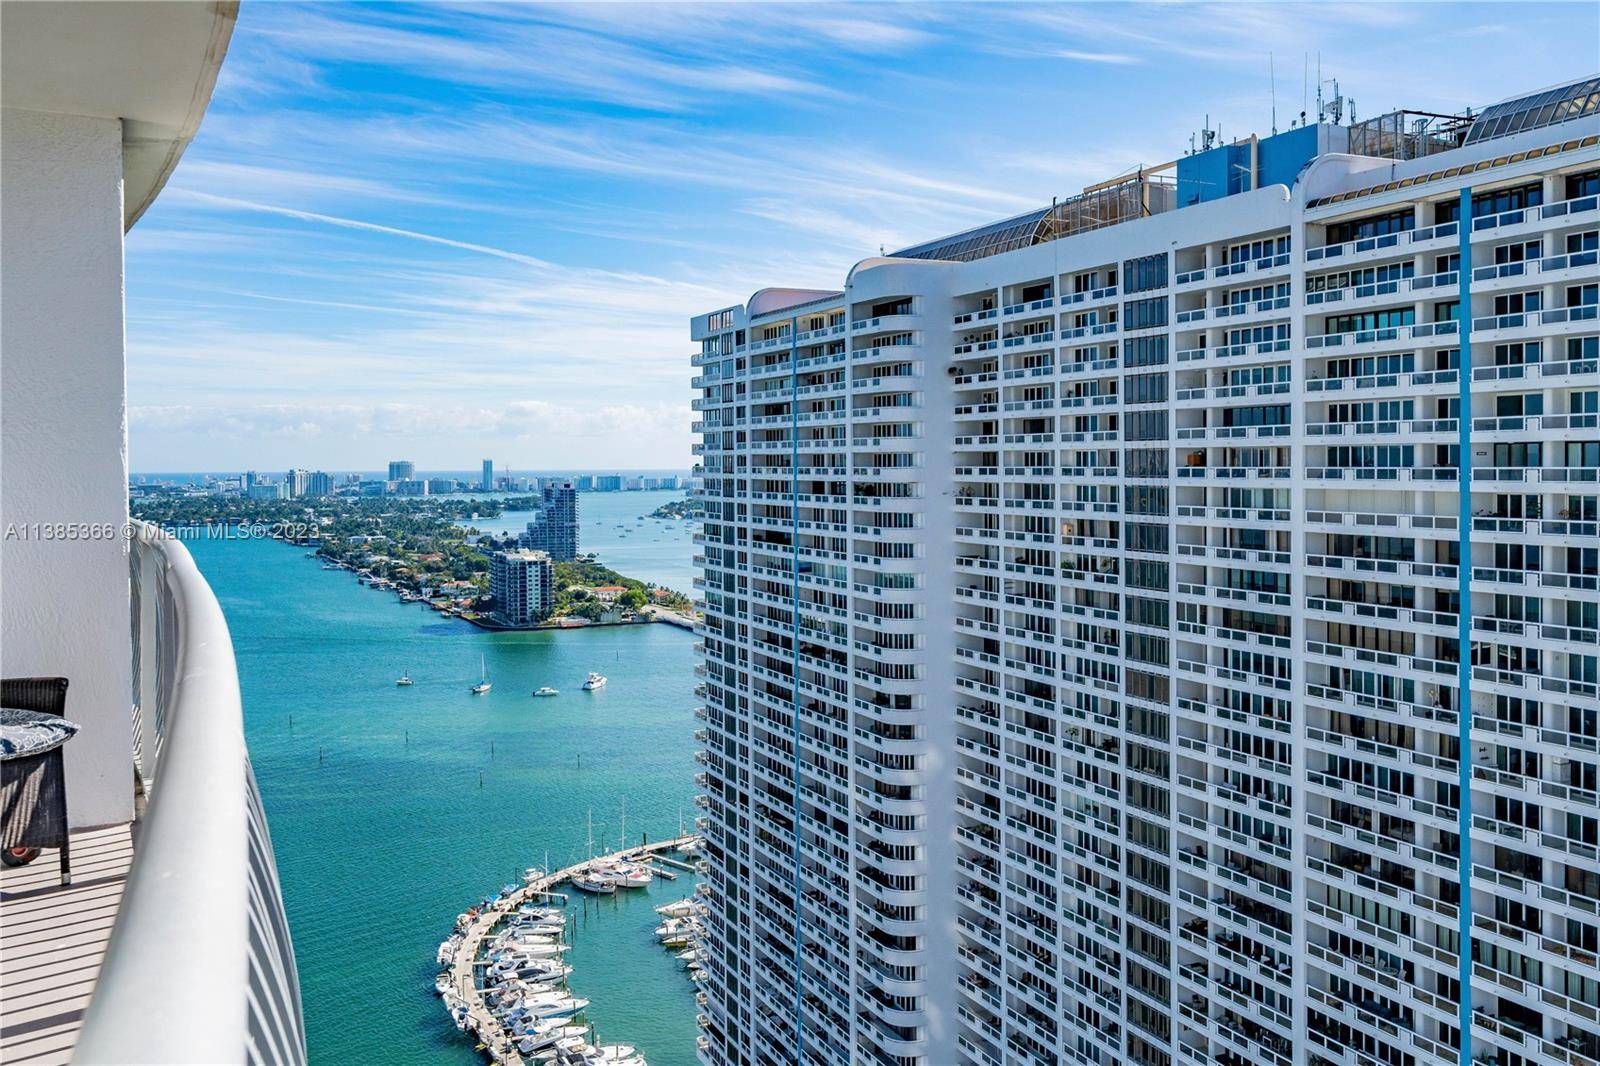 Looking for a luxurious rental experience with breathtaking views in Miami ?